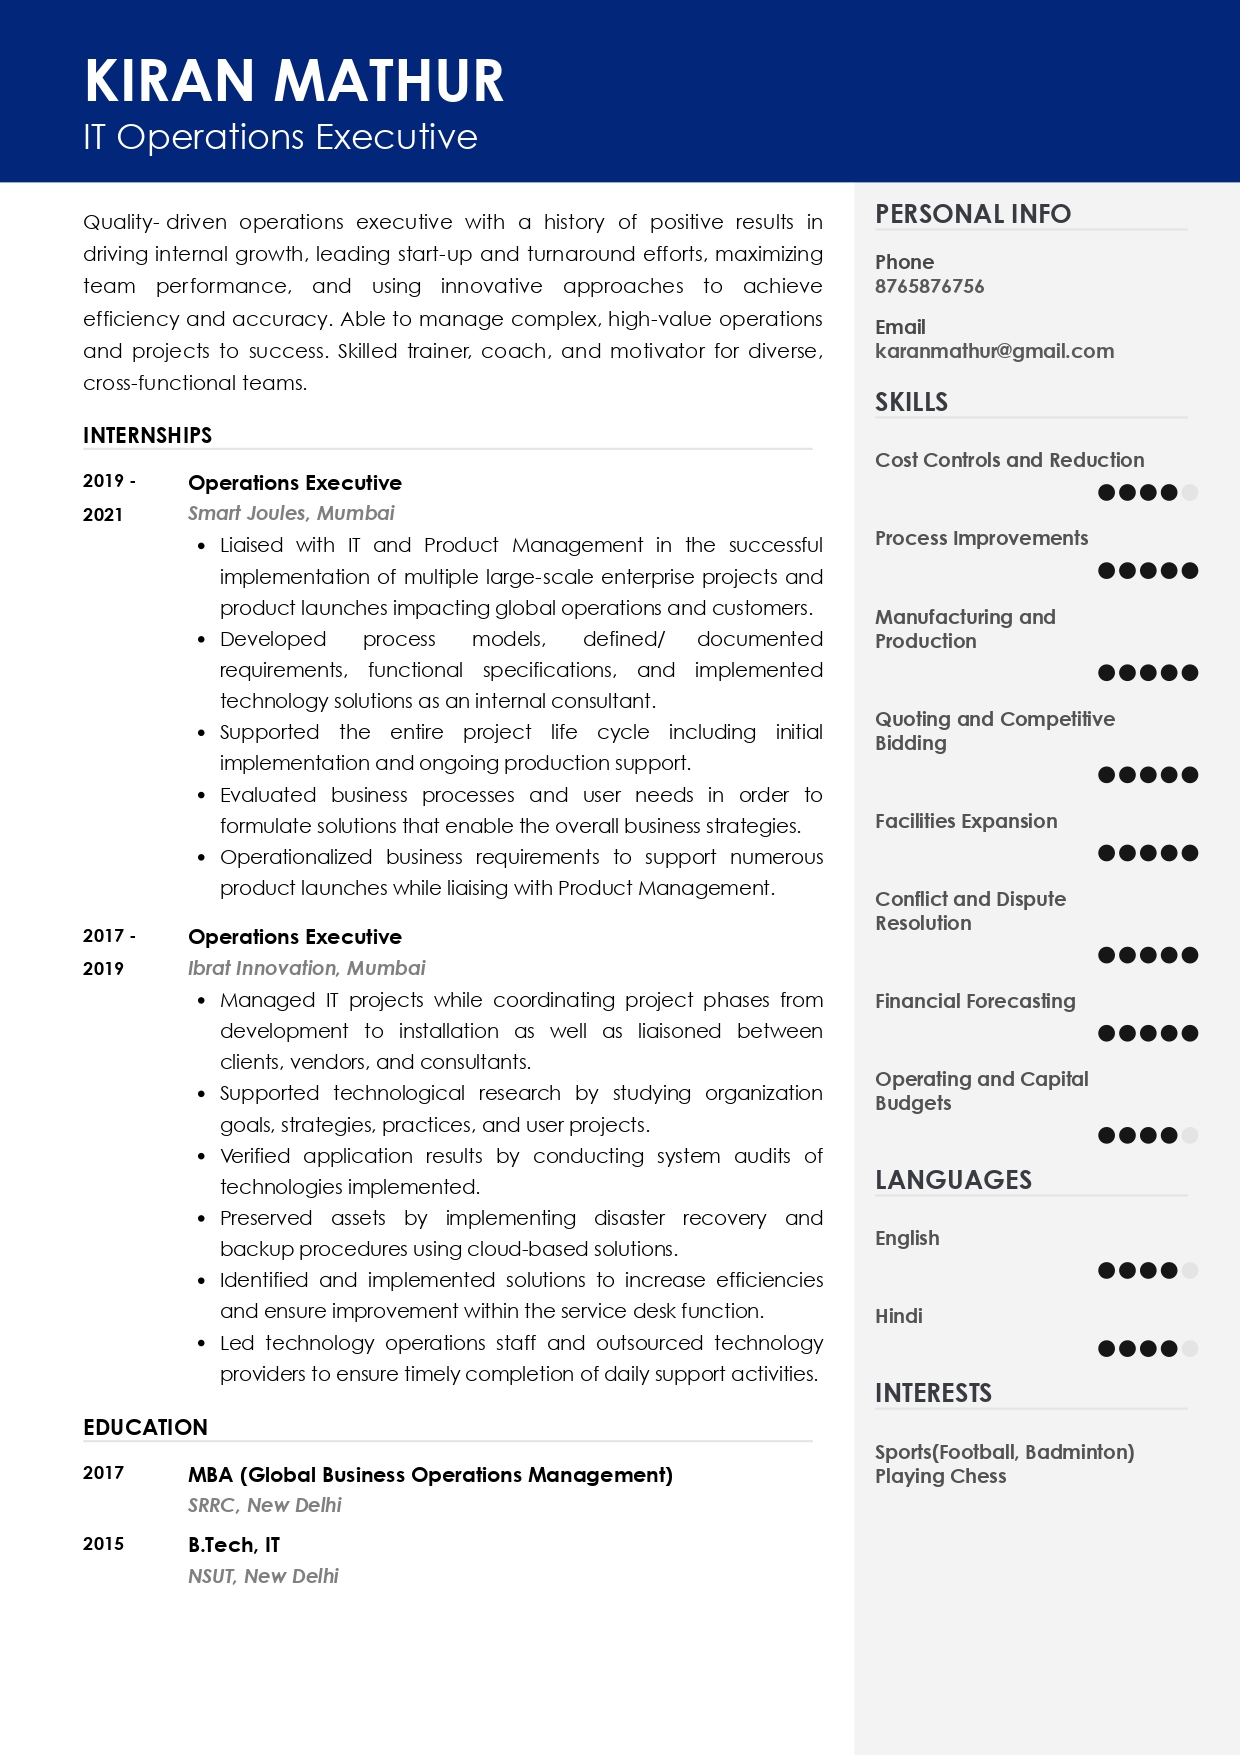 Sample Resume of IT Operations Executive | Free Resume Templates & Samples on Resumod.co